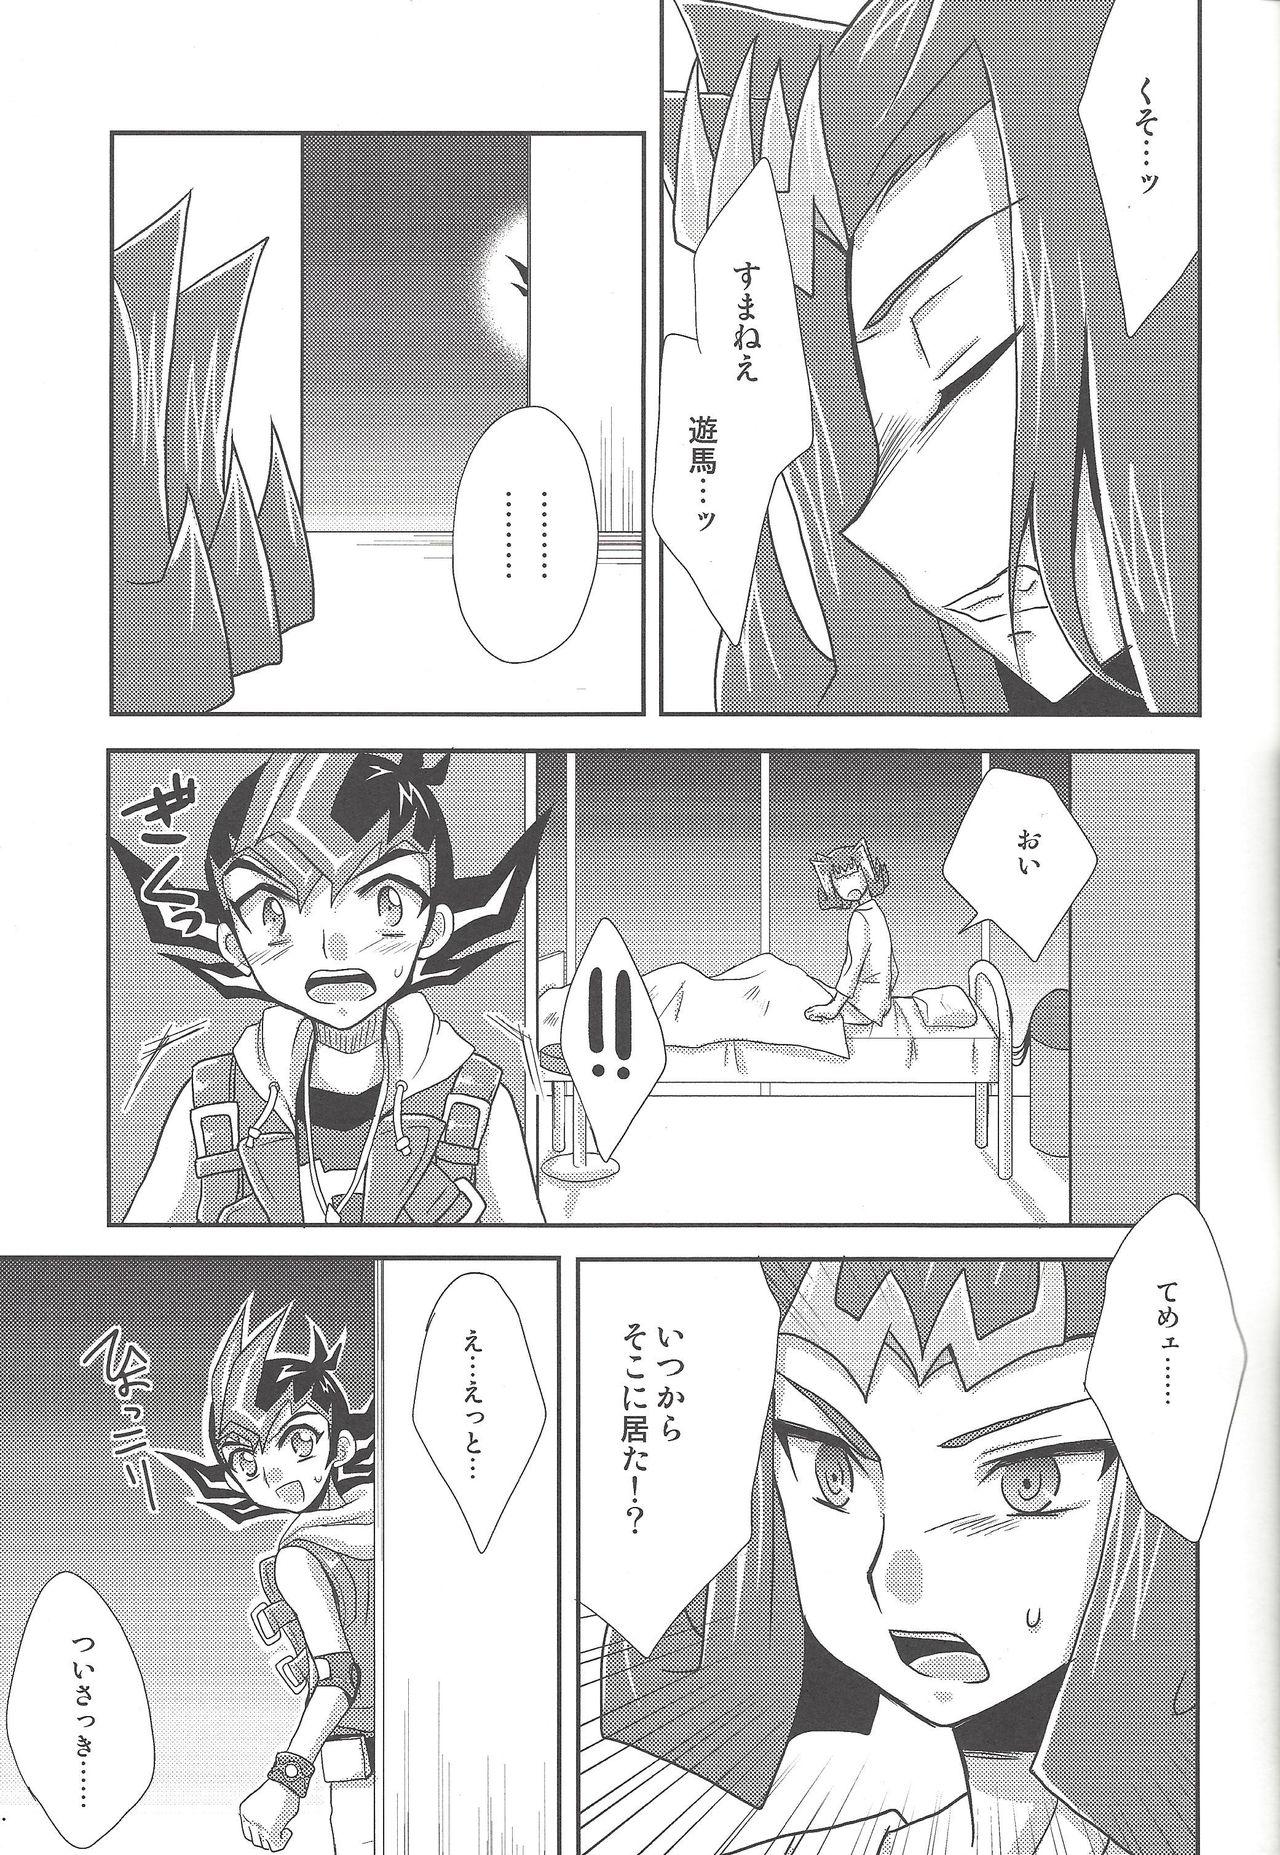 Whipping Labyrinth - Yu-gi-oh zexal Monster Dick - Page 4